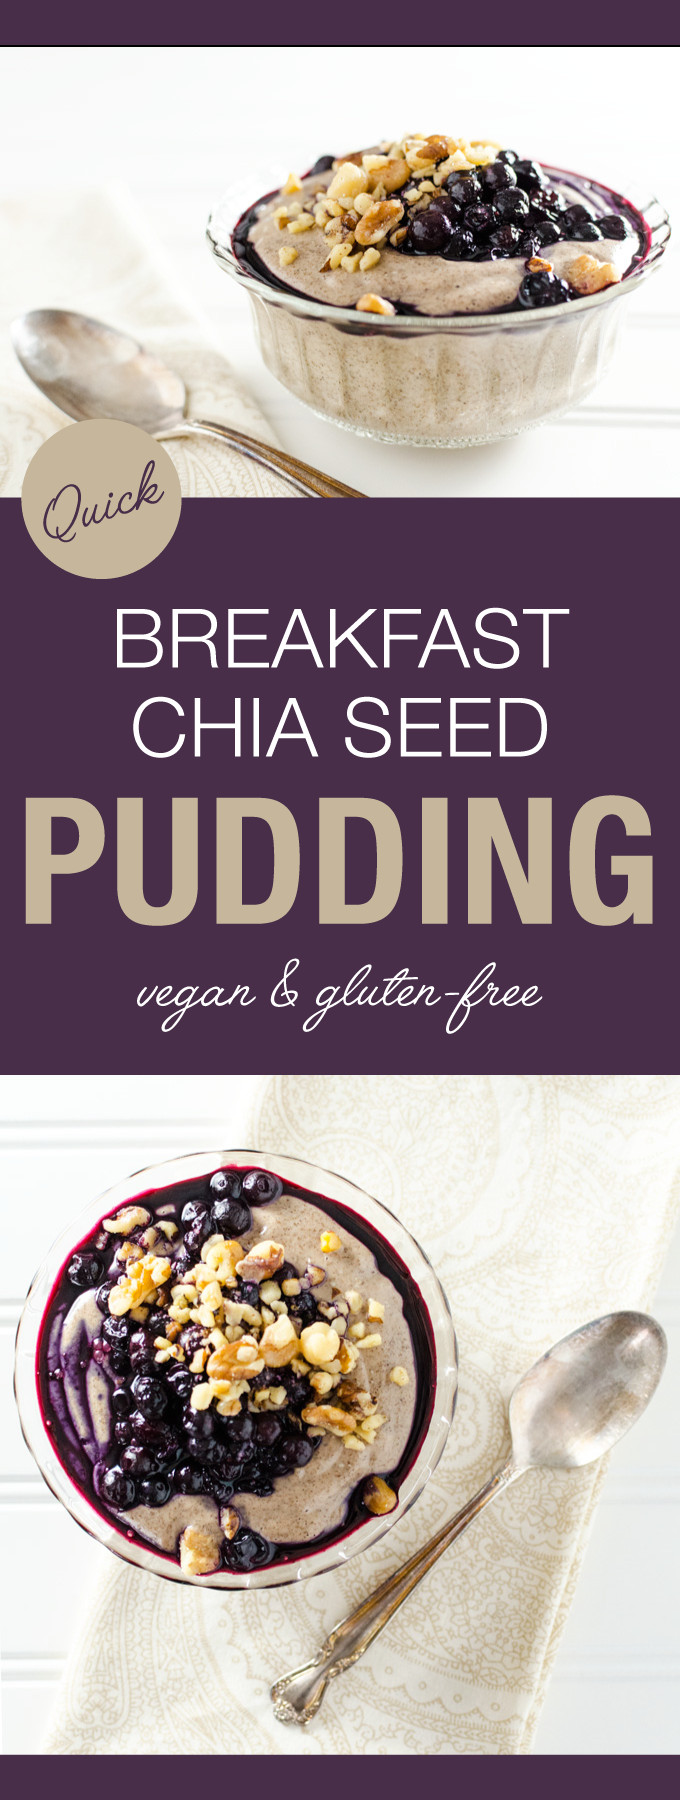 Chia Seed Breakfast Recipes
 Quick Breakfast Chia Seed Pudding